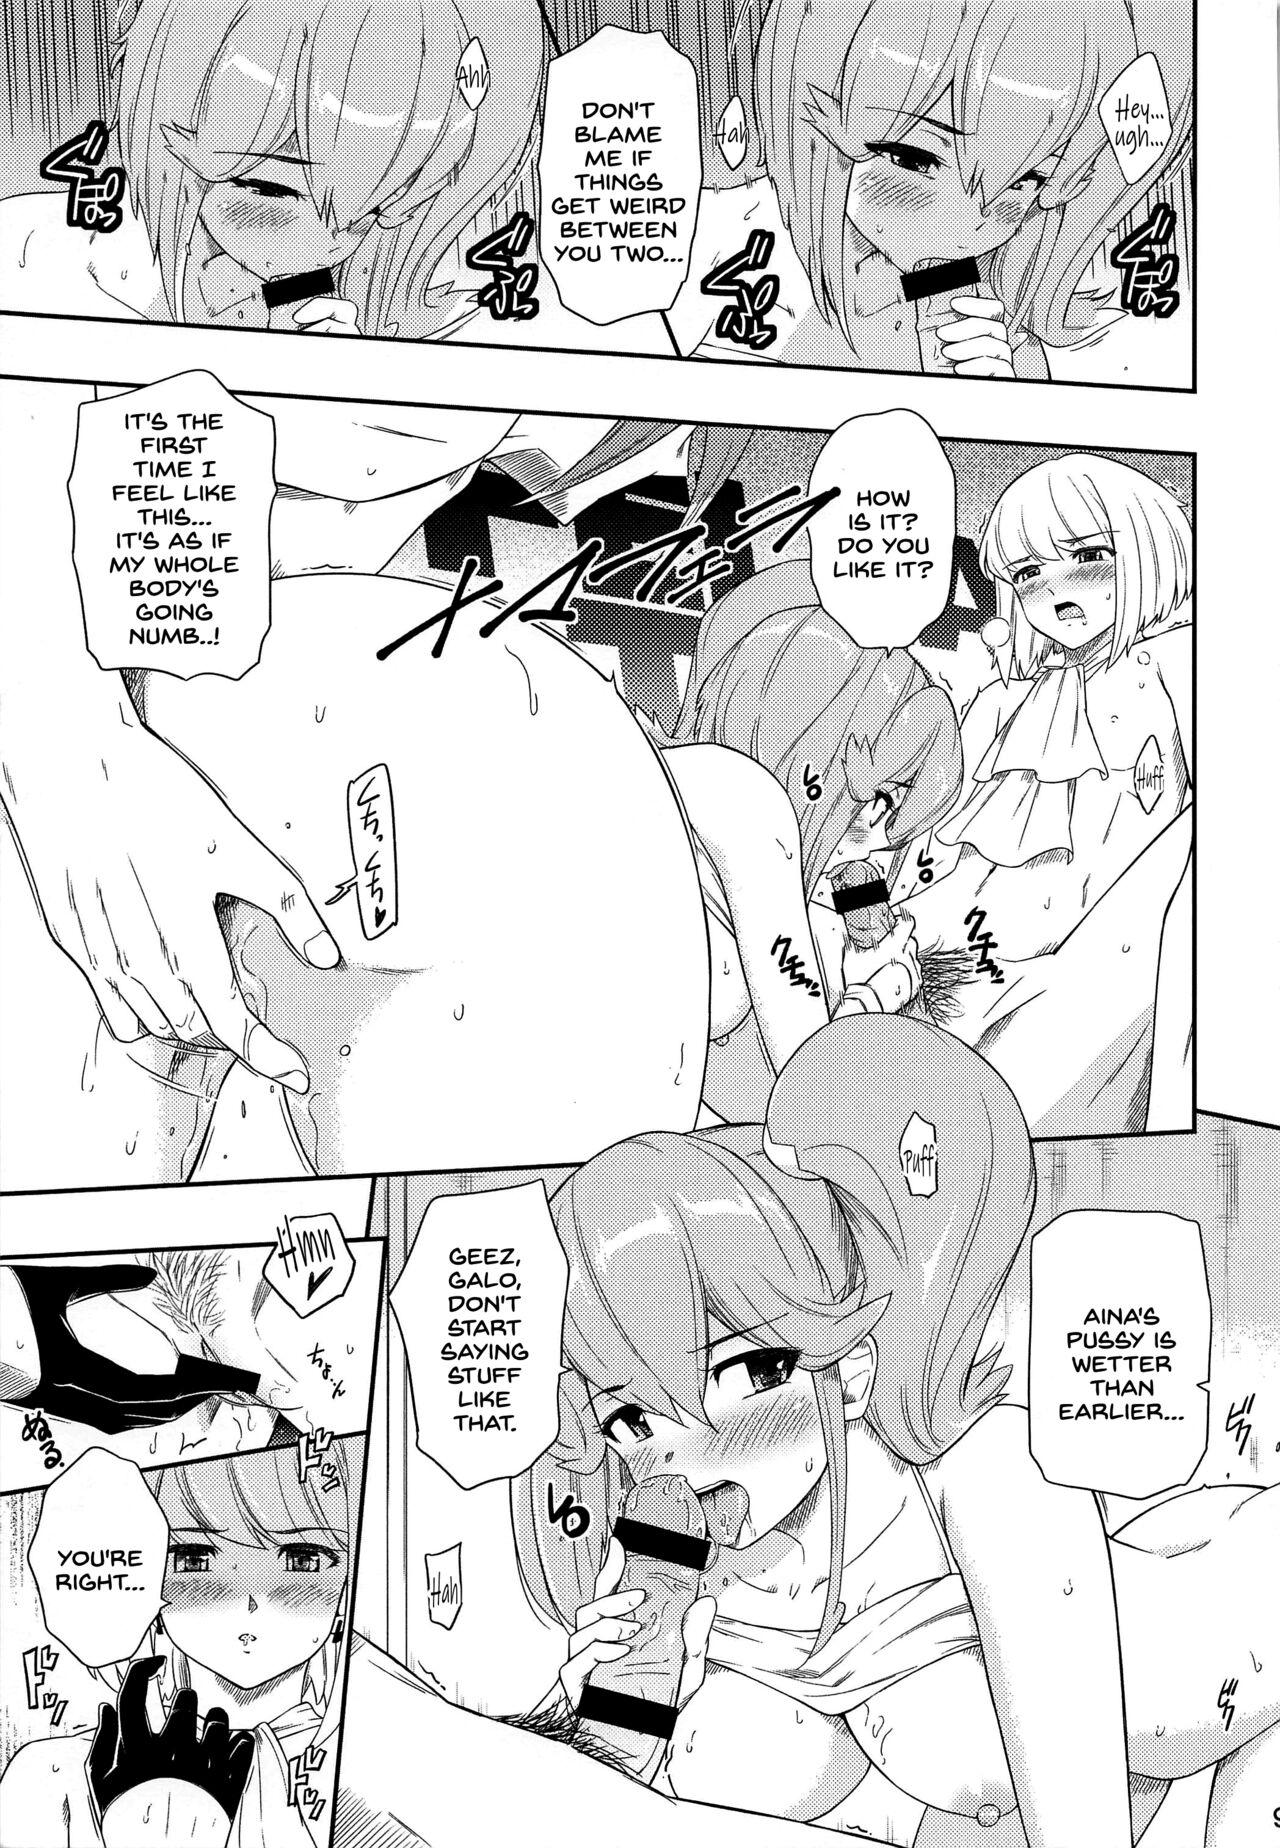 Best Blowjob EROMARE - Suddenly 3P sex is happening... Xxx - Page 8